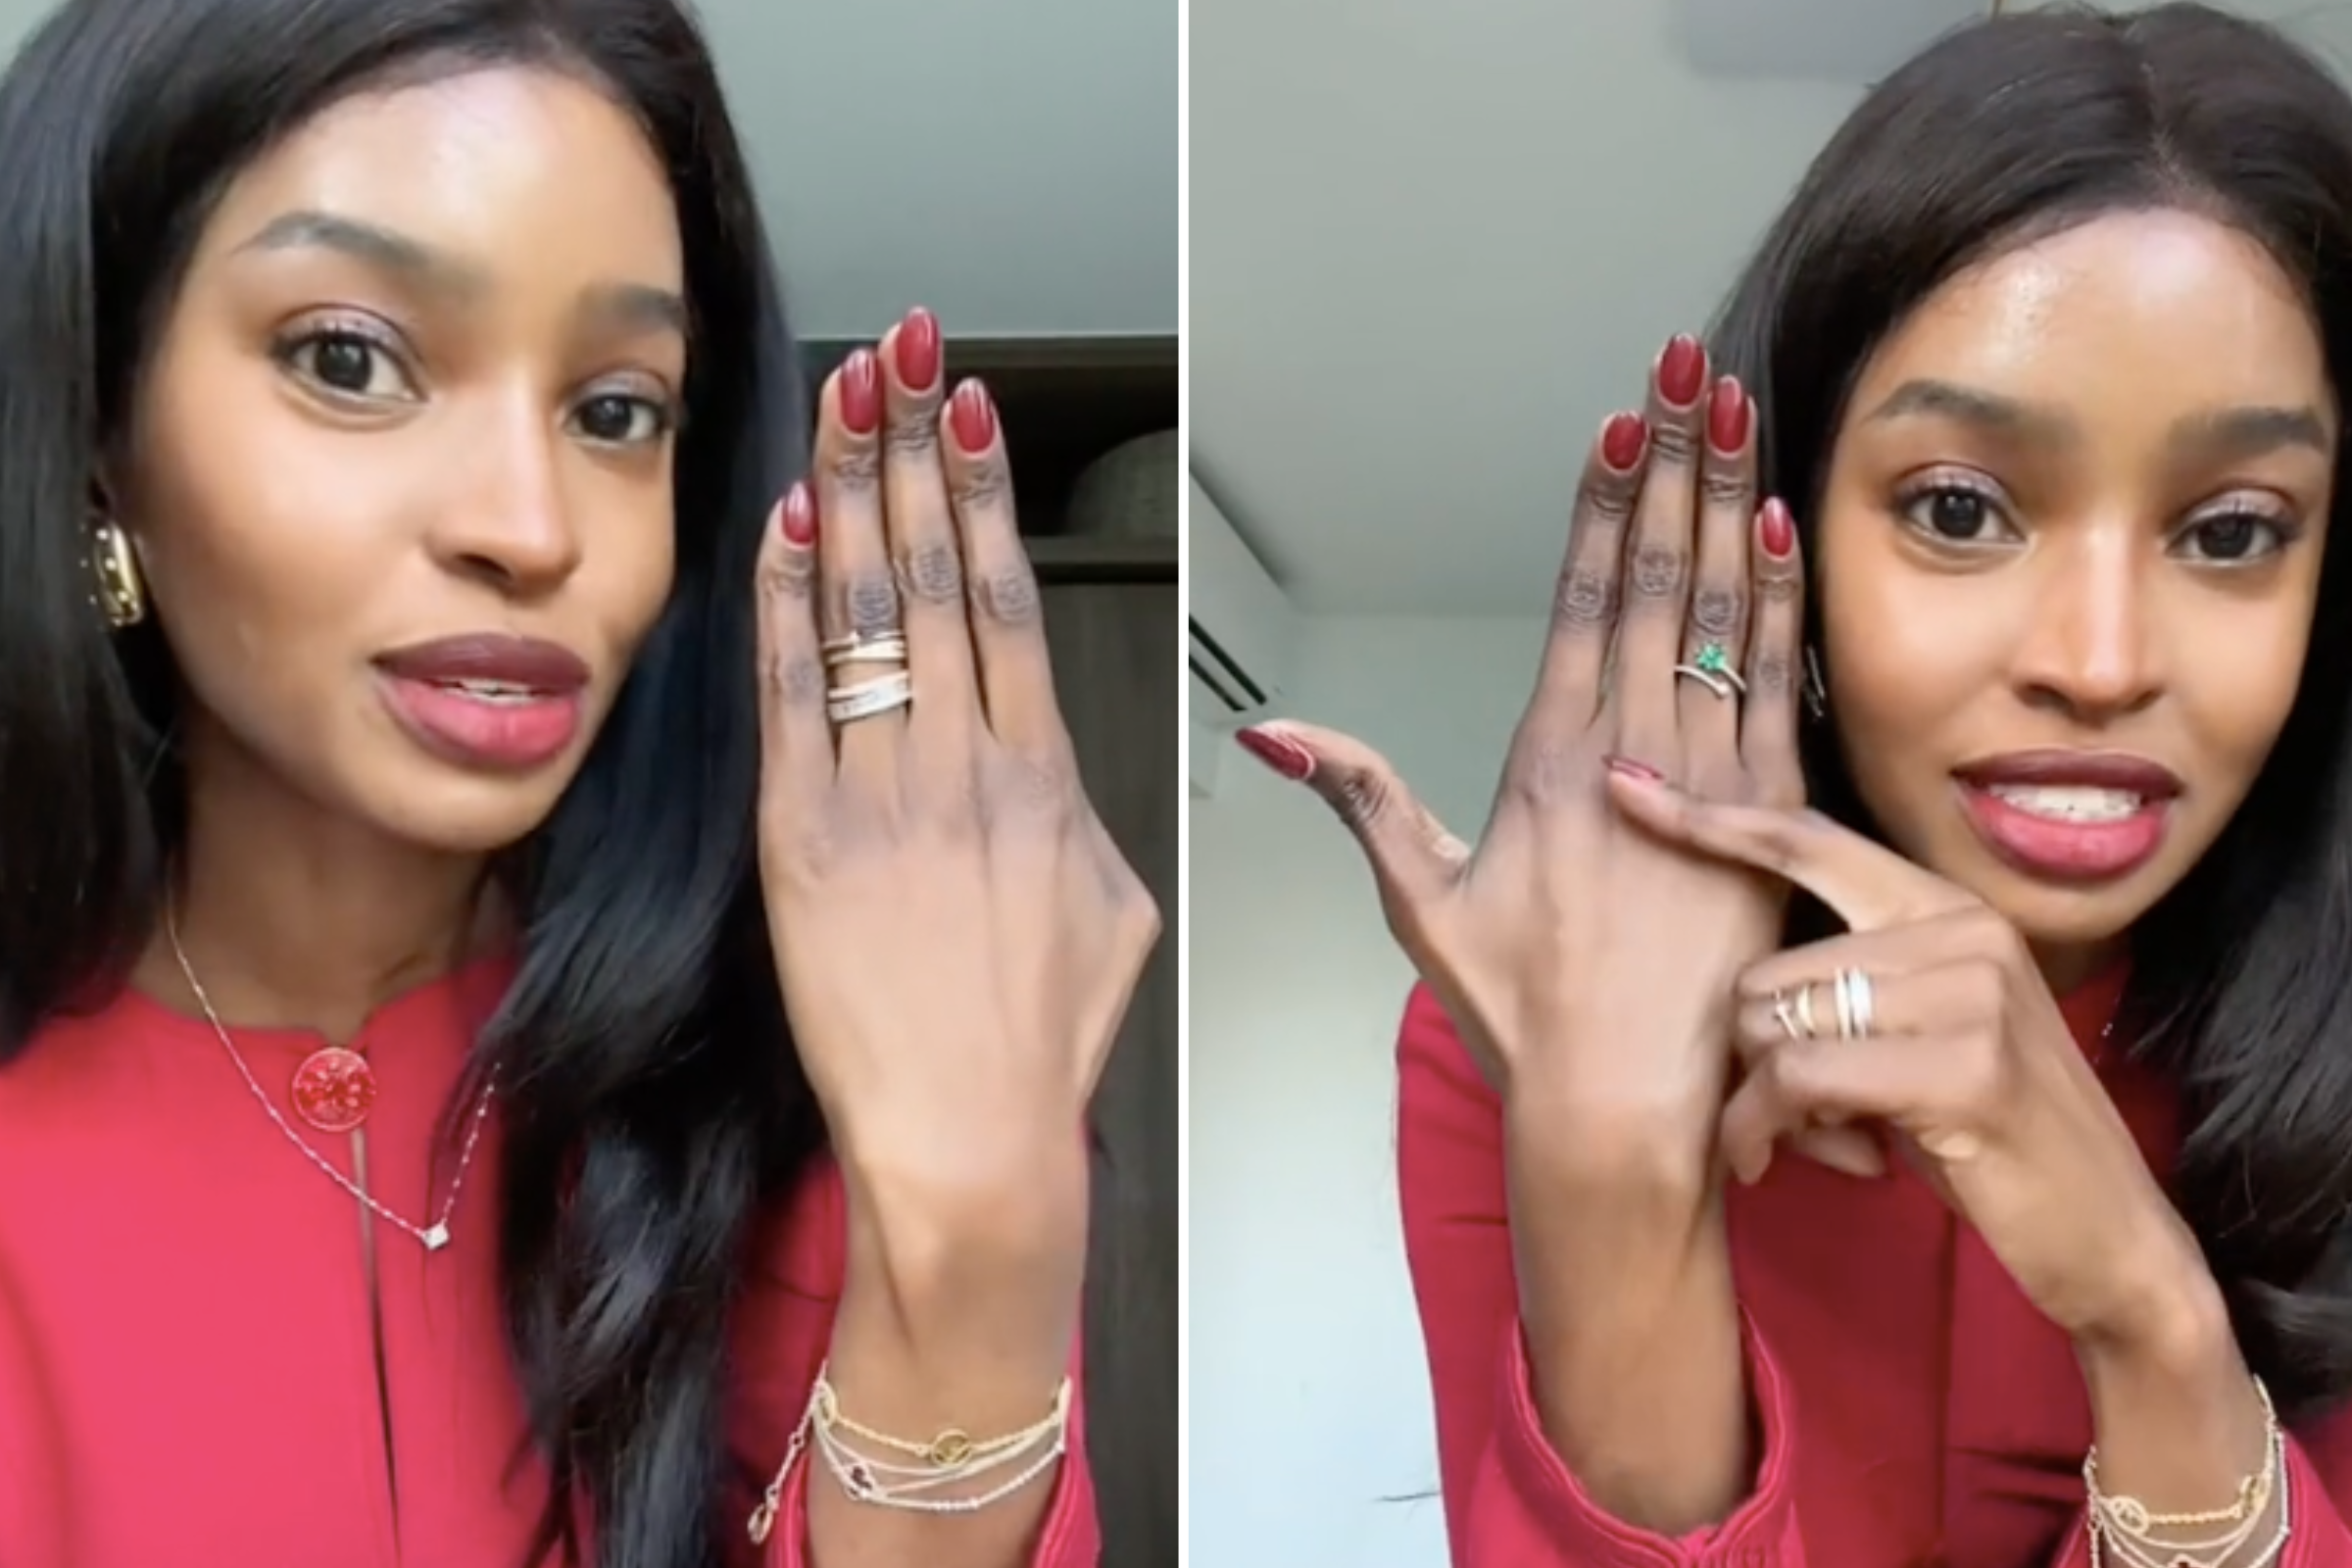 Woman Issues Warning As She Shares Shocking Result of Gel Manicure